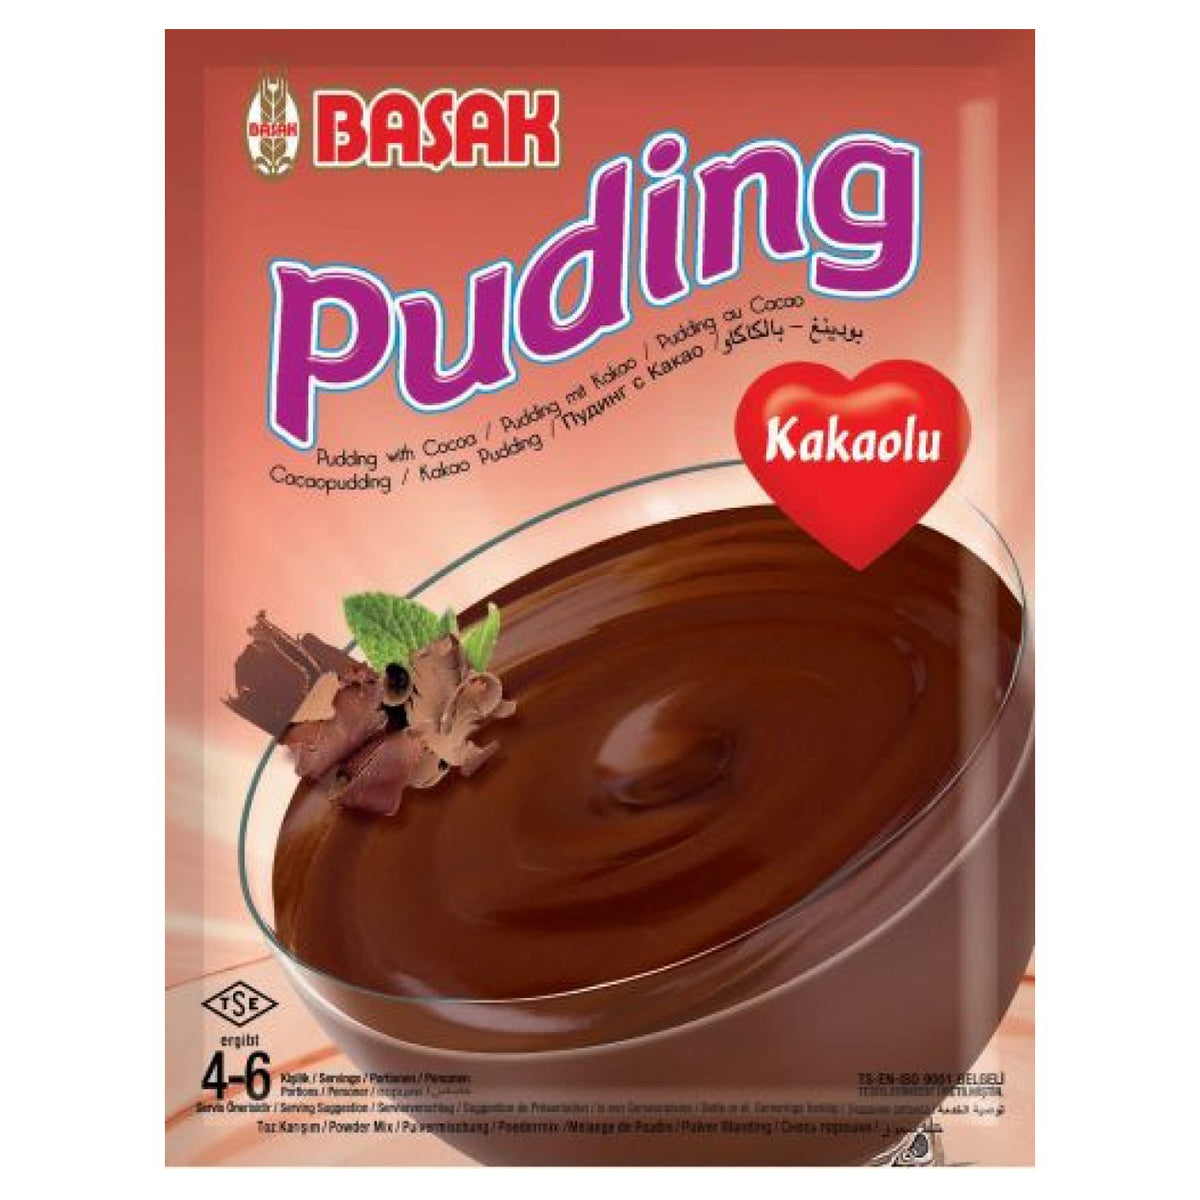 A bag of Basak - Cacao Pudding - 120g with chocolate in it.